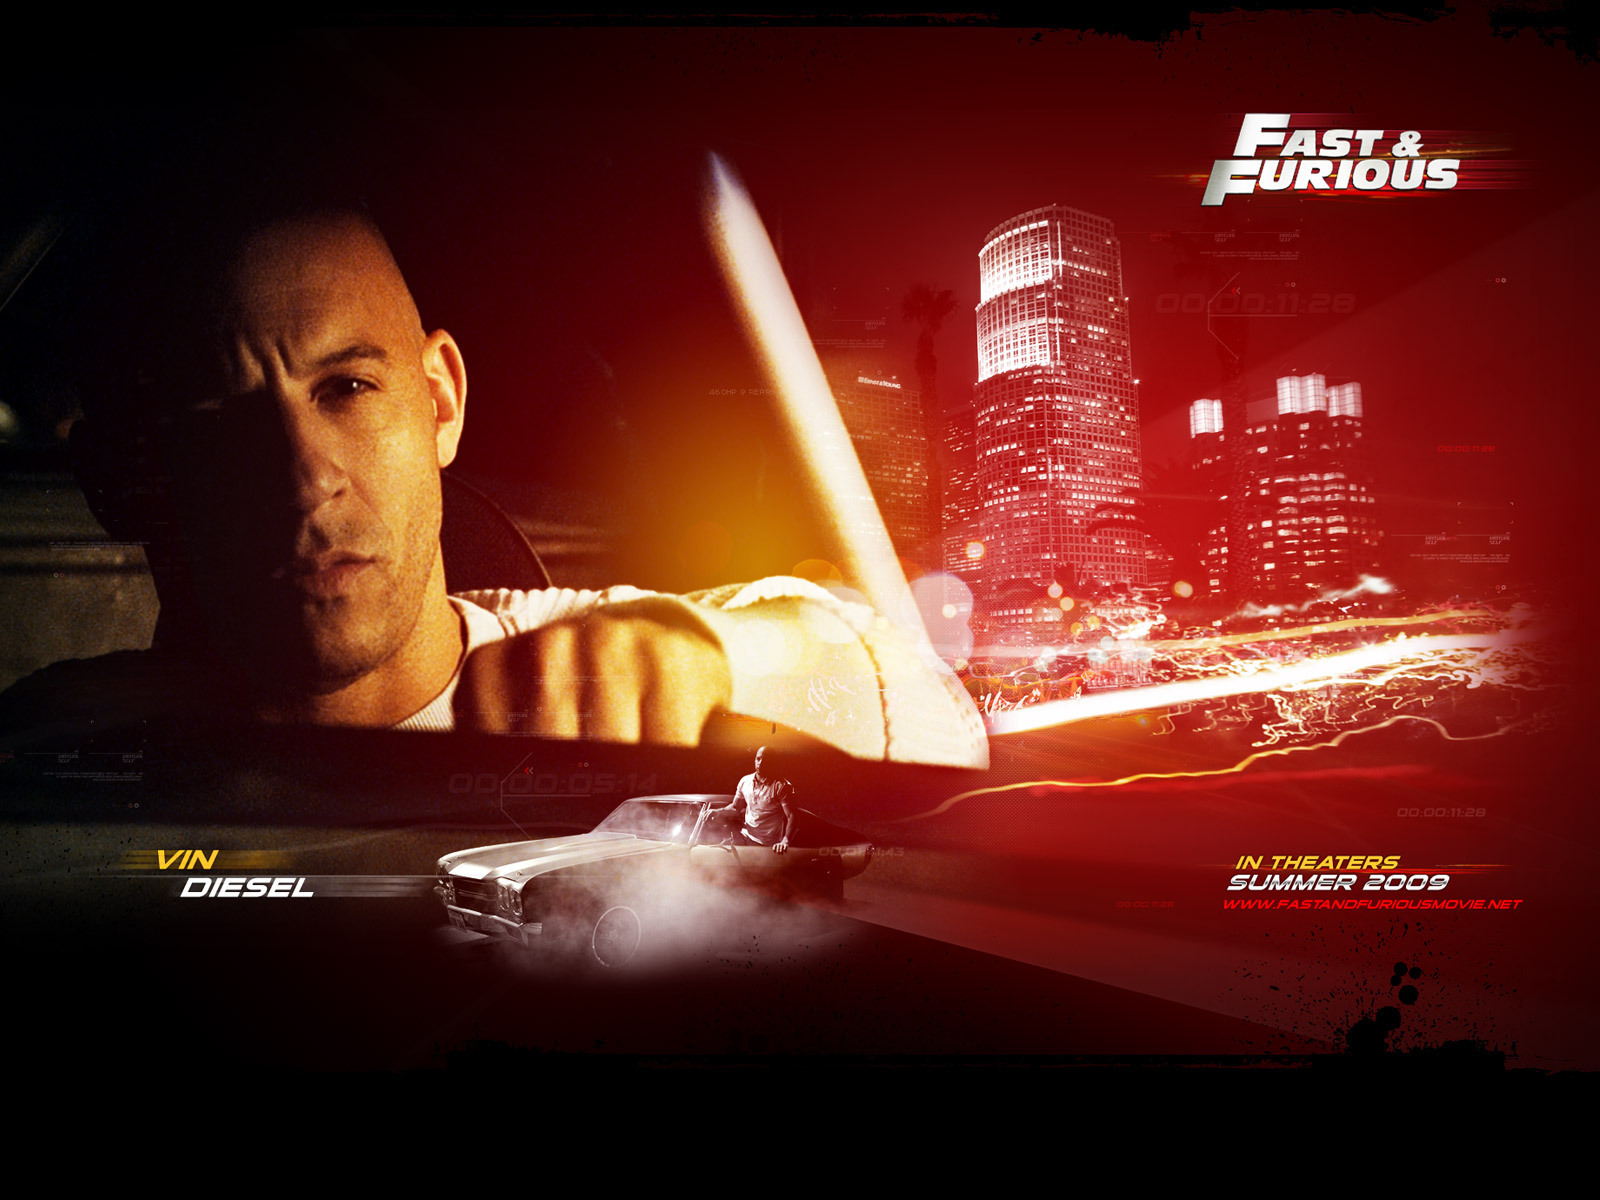  Fast and Furious